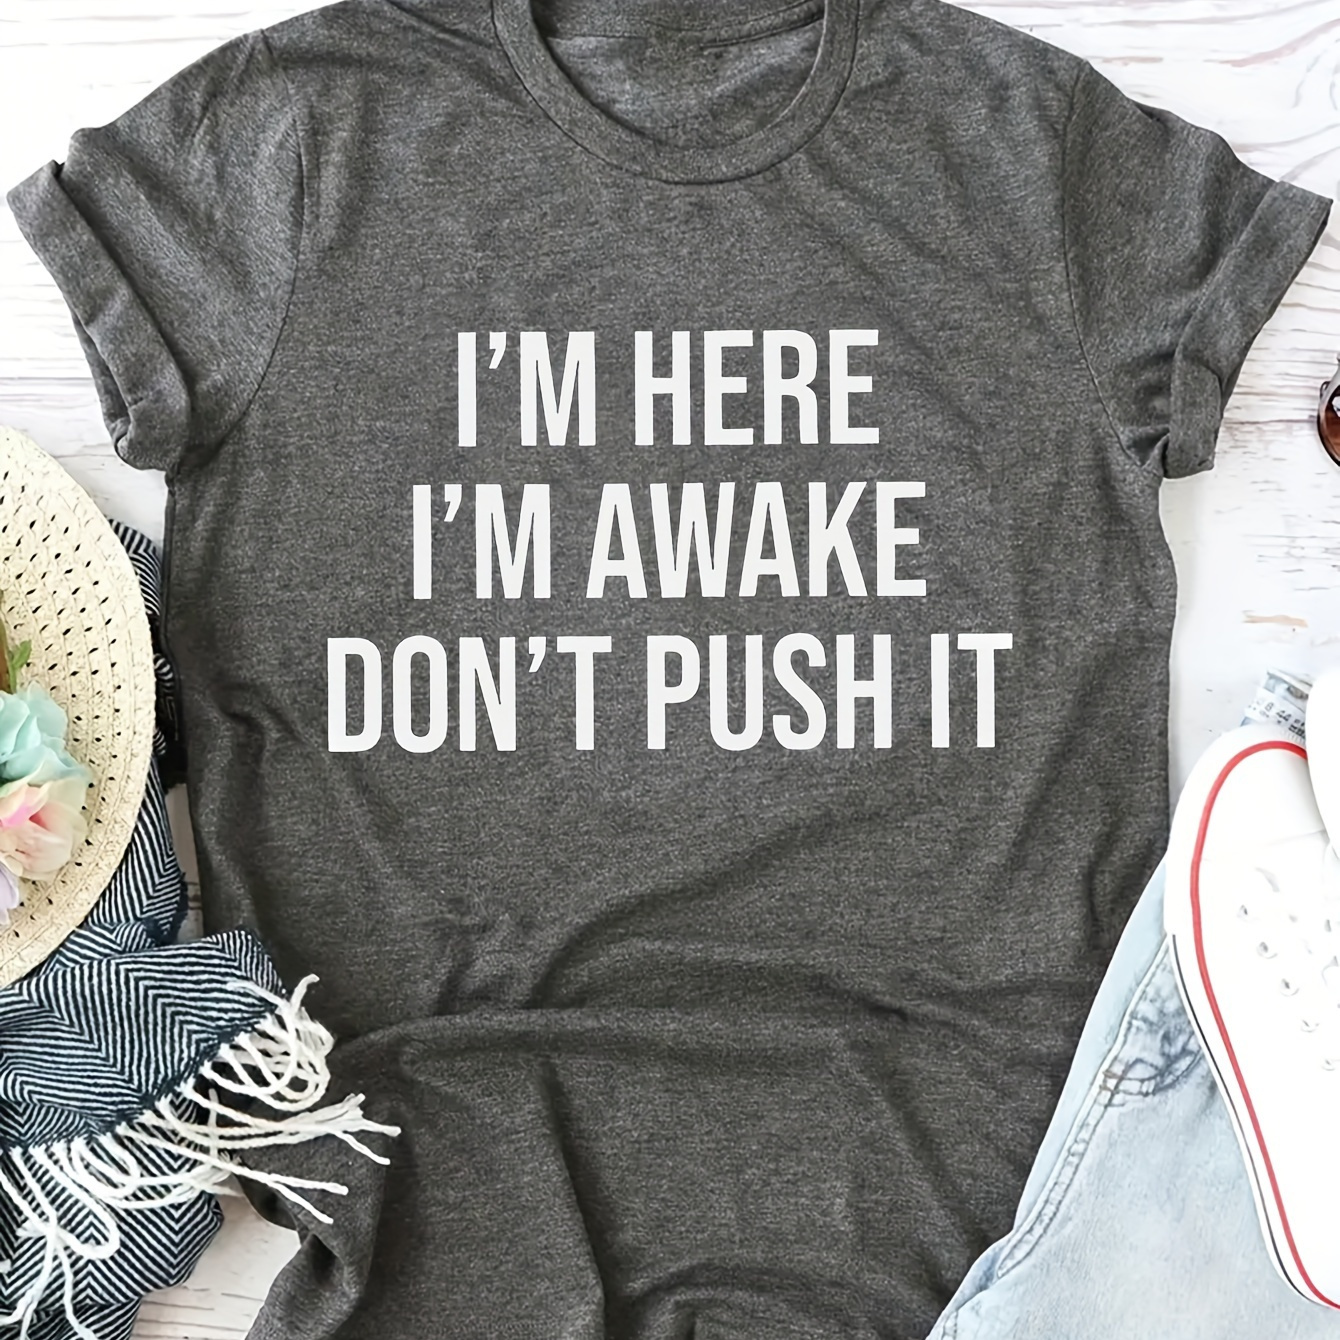 

I'm Awake Letter Print T-shirt, Short Sleeve Crew Neck Casual Top For Summer & Spring, Women's Clothing